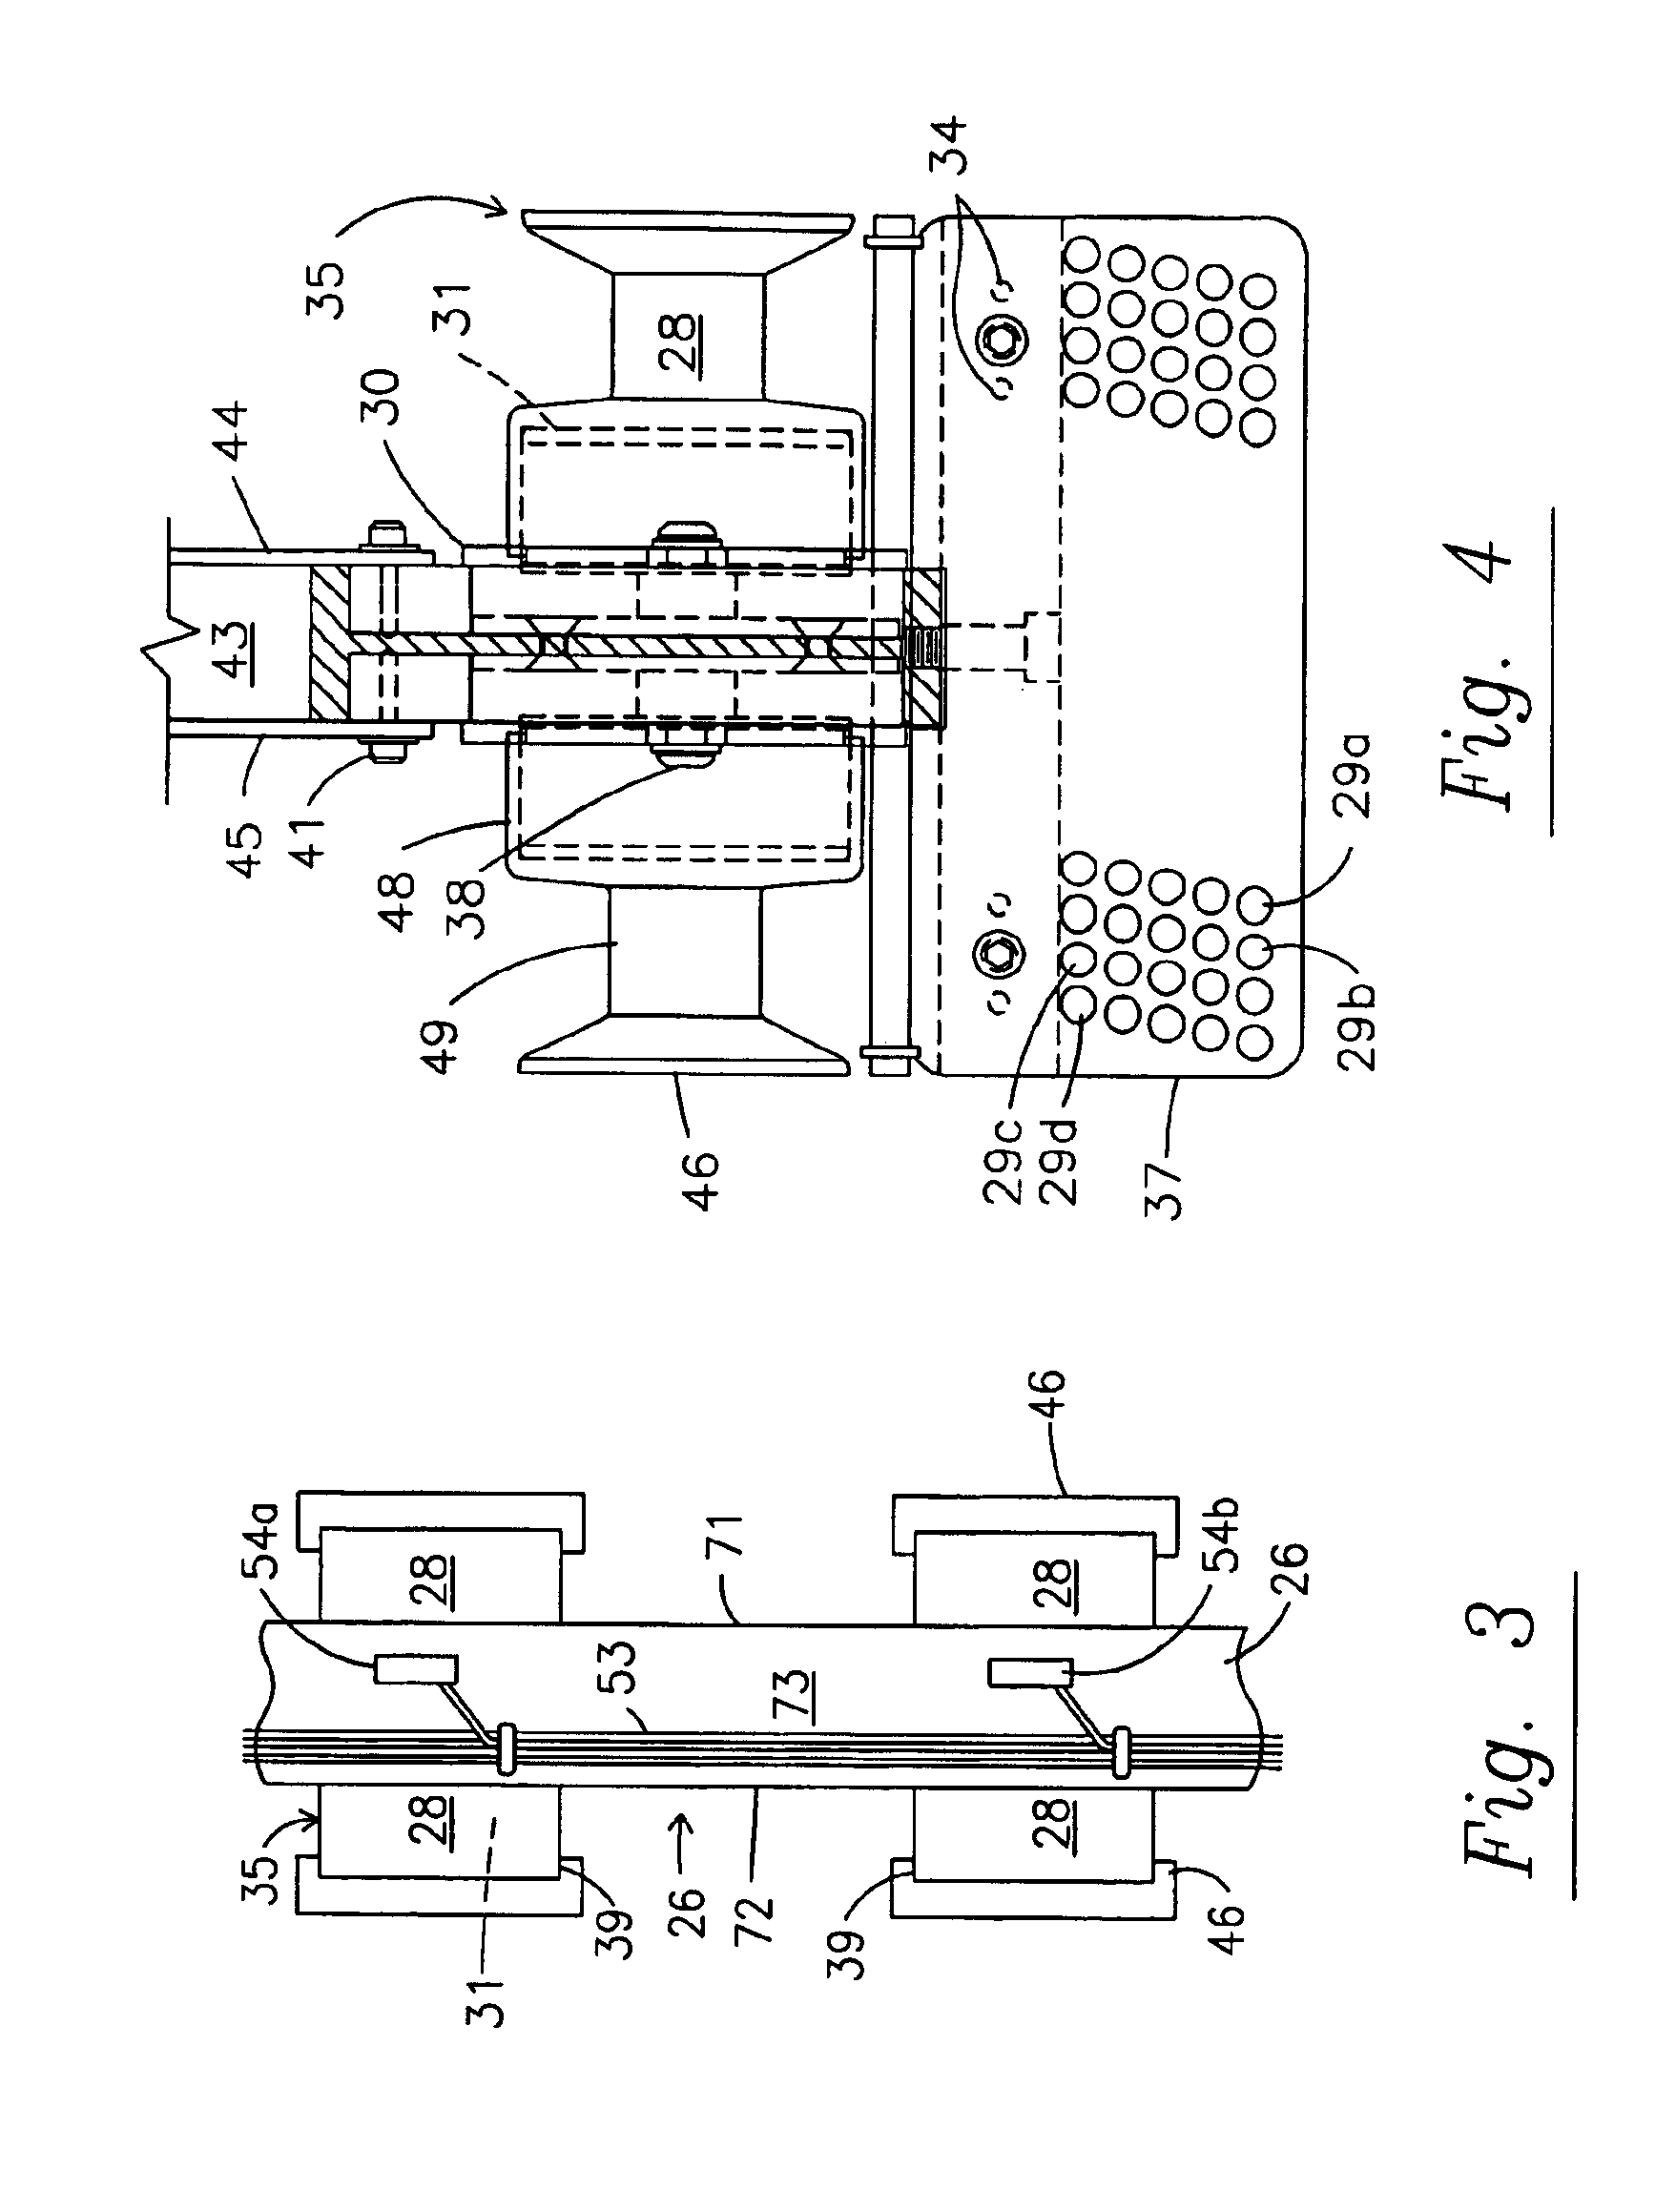 Double end servo scroll and direct scroll driver pattern attachment for tufting machine